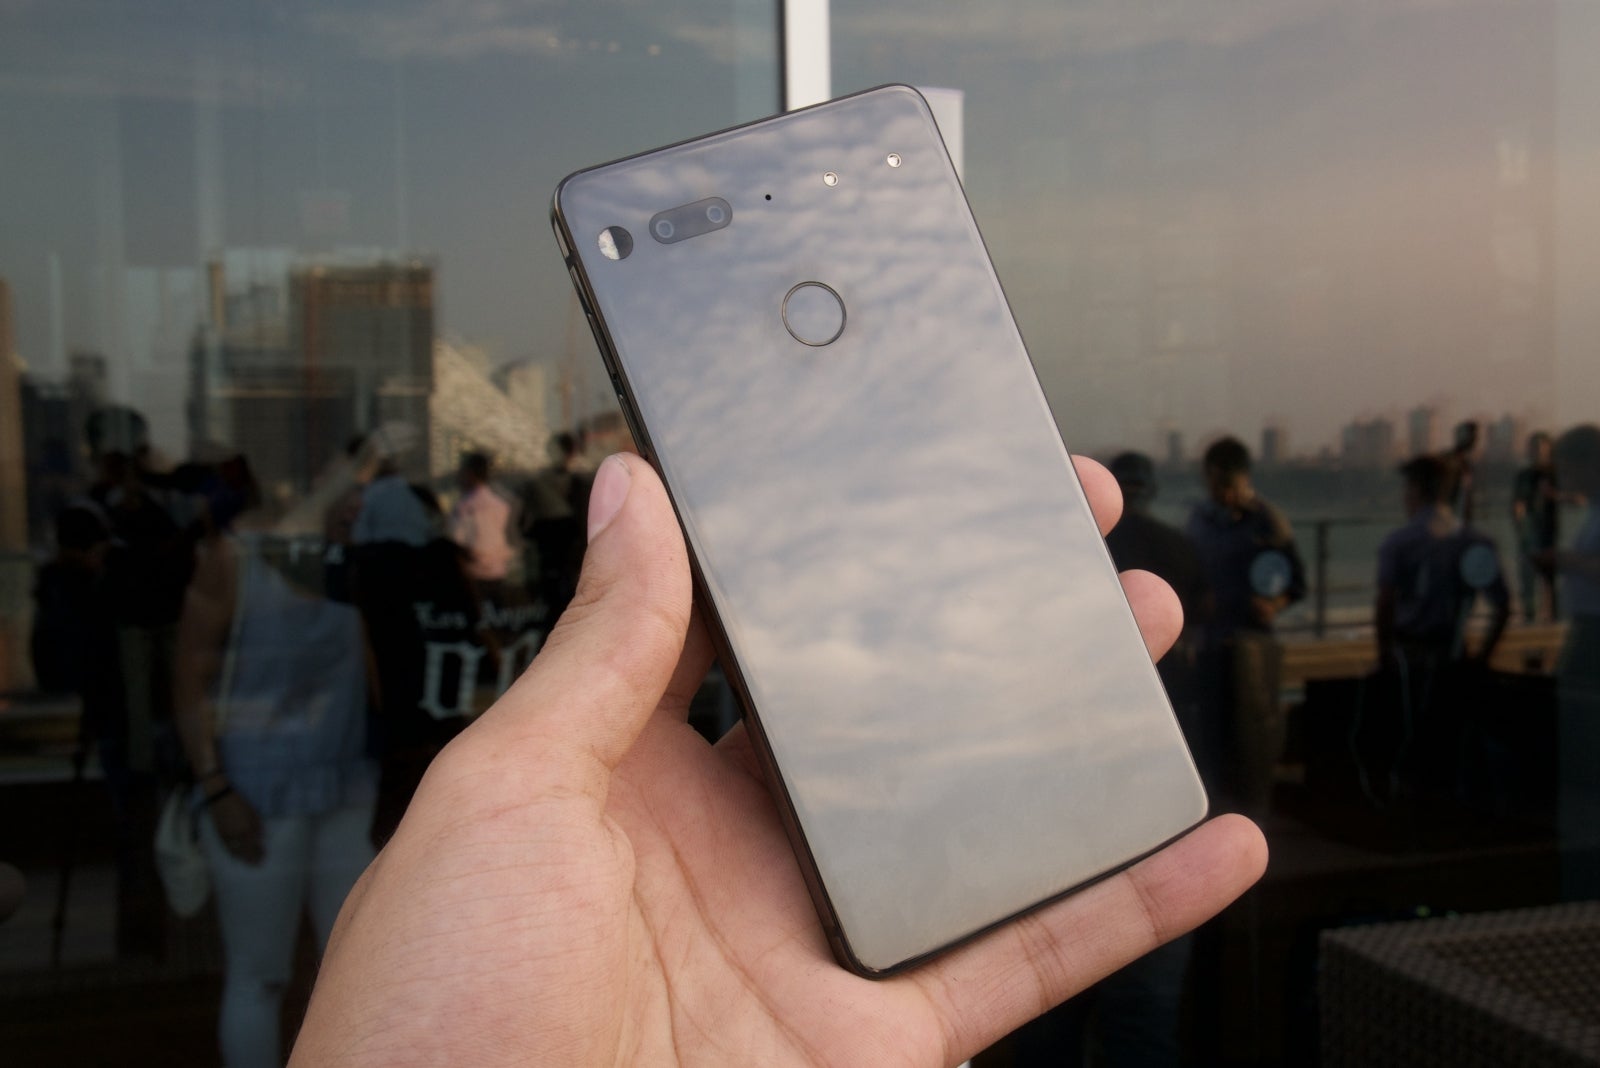 Essential Phone hands-on